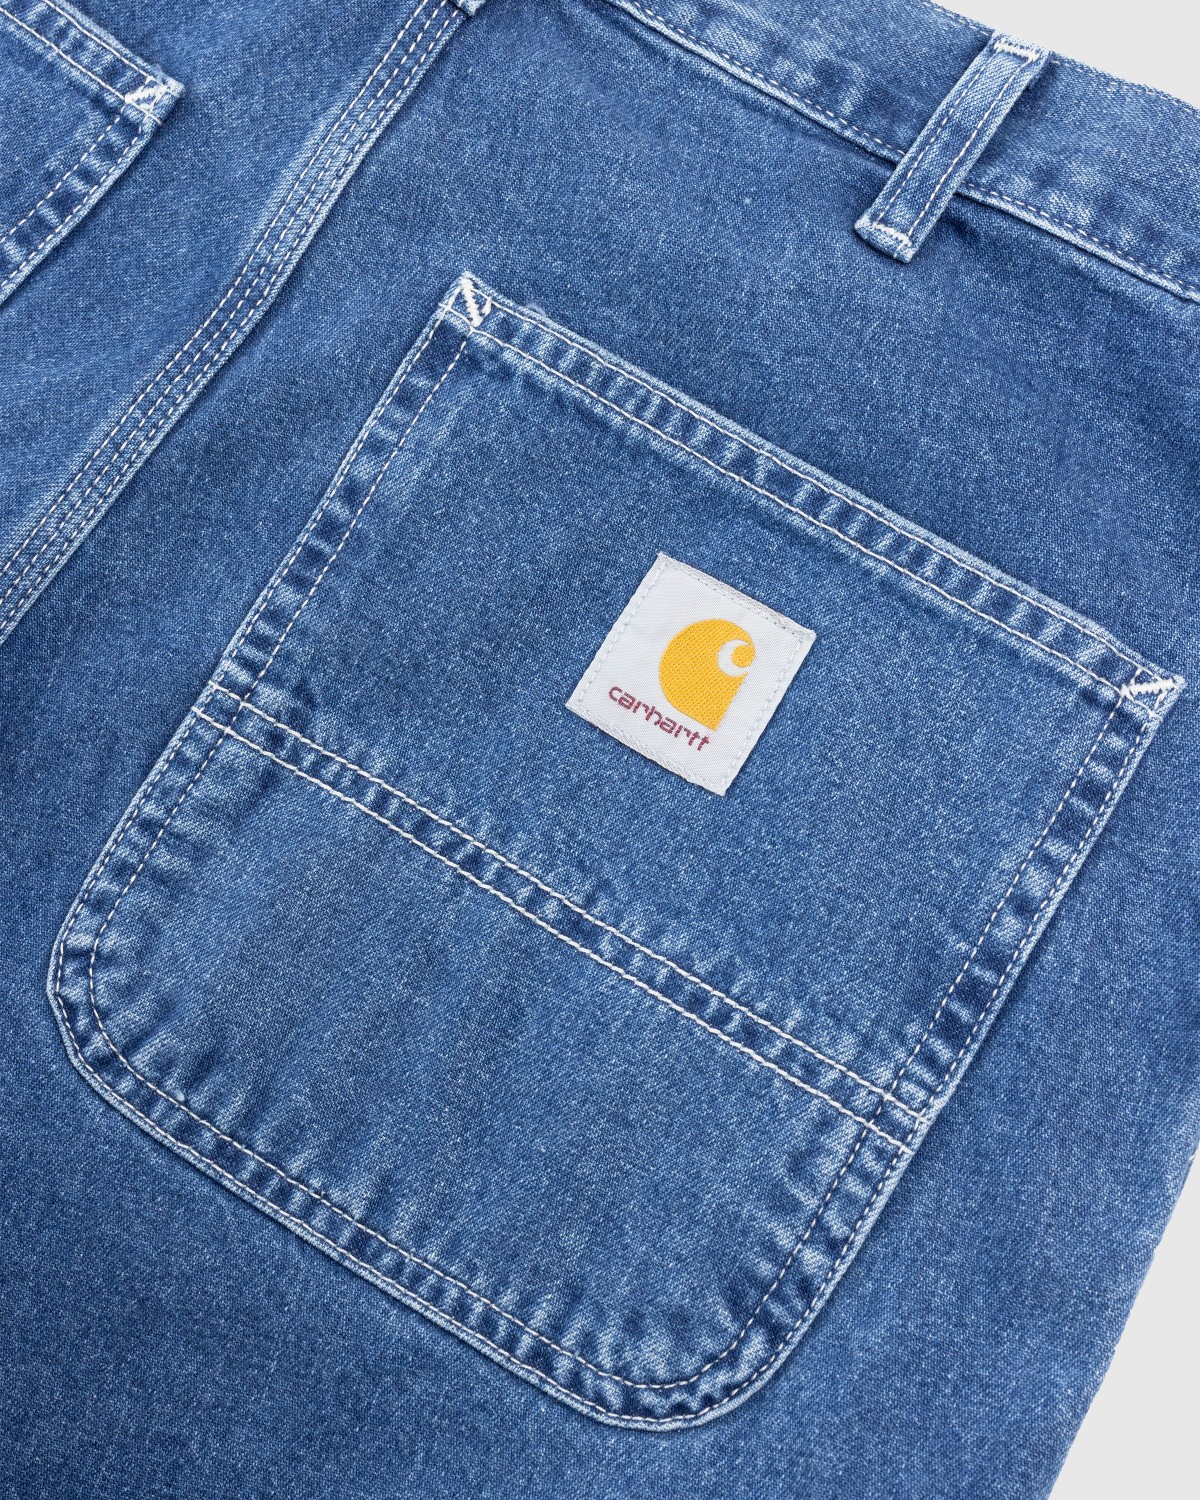 Carhartt WIP – Simple Pant Blue/Stone-Washed | Highsnobiety Shop